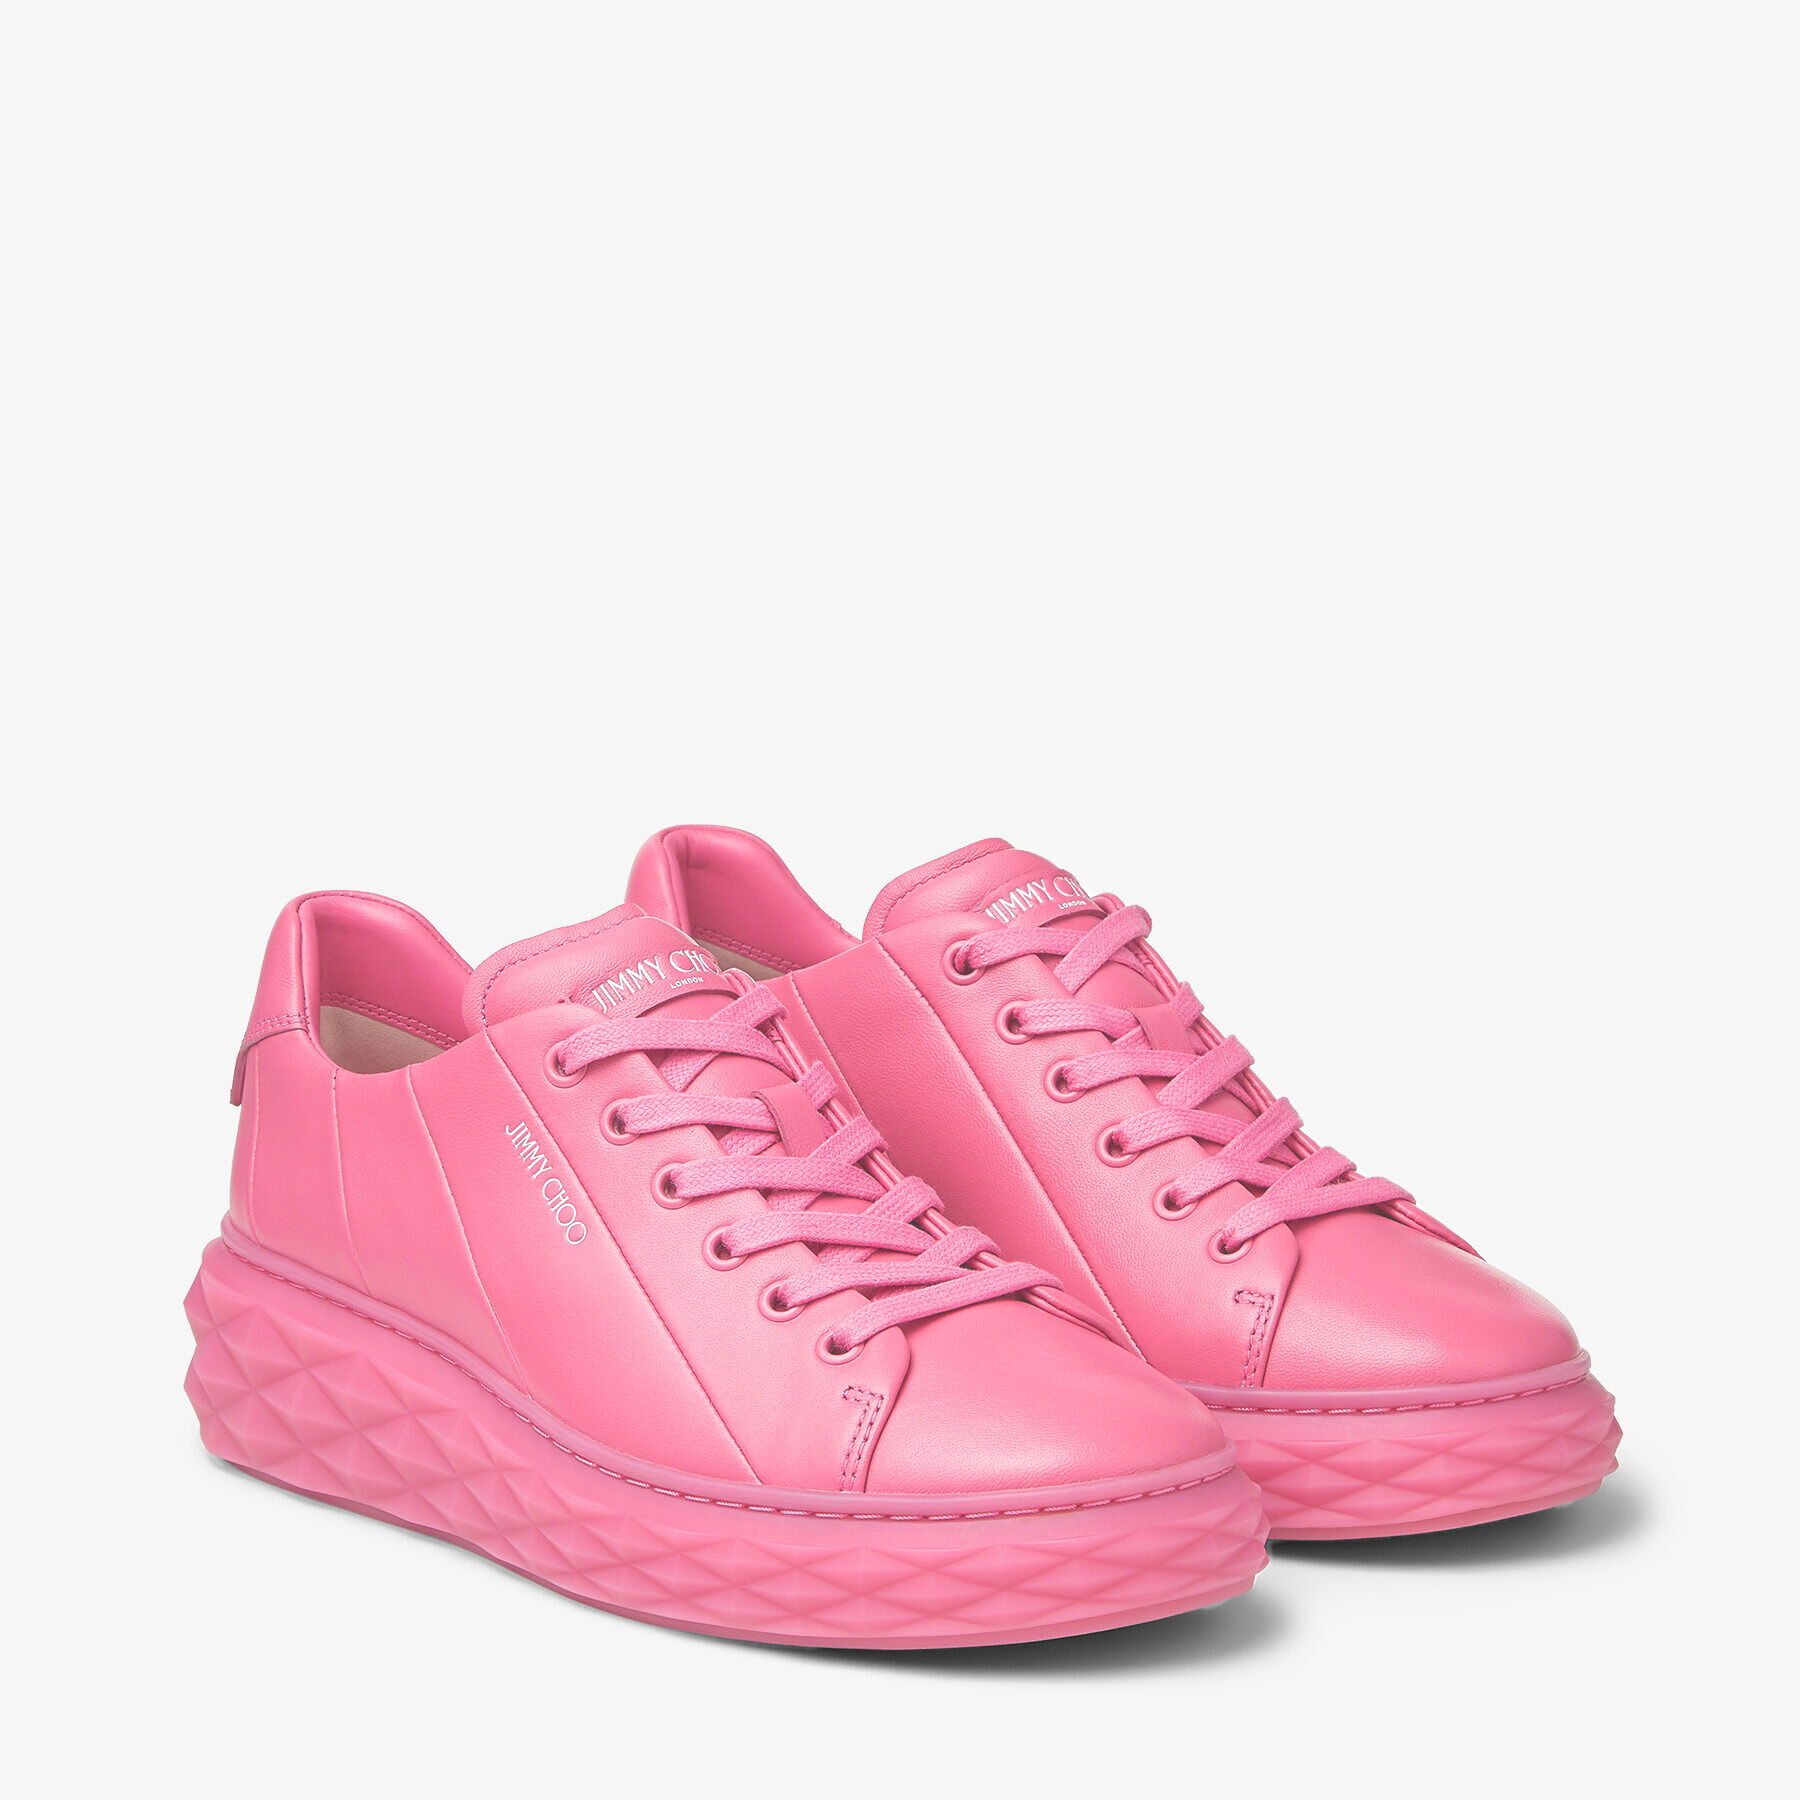 Candy Pink Nappa Leather Low-Top Trainers with Platform Sole | DIAMOND ...